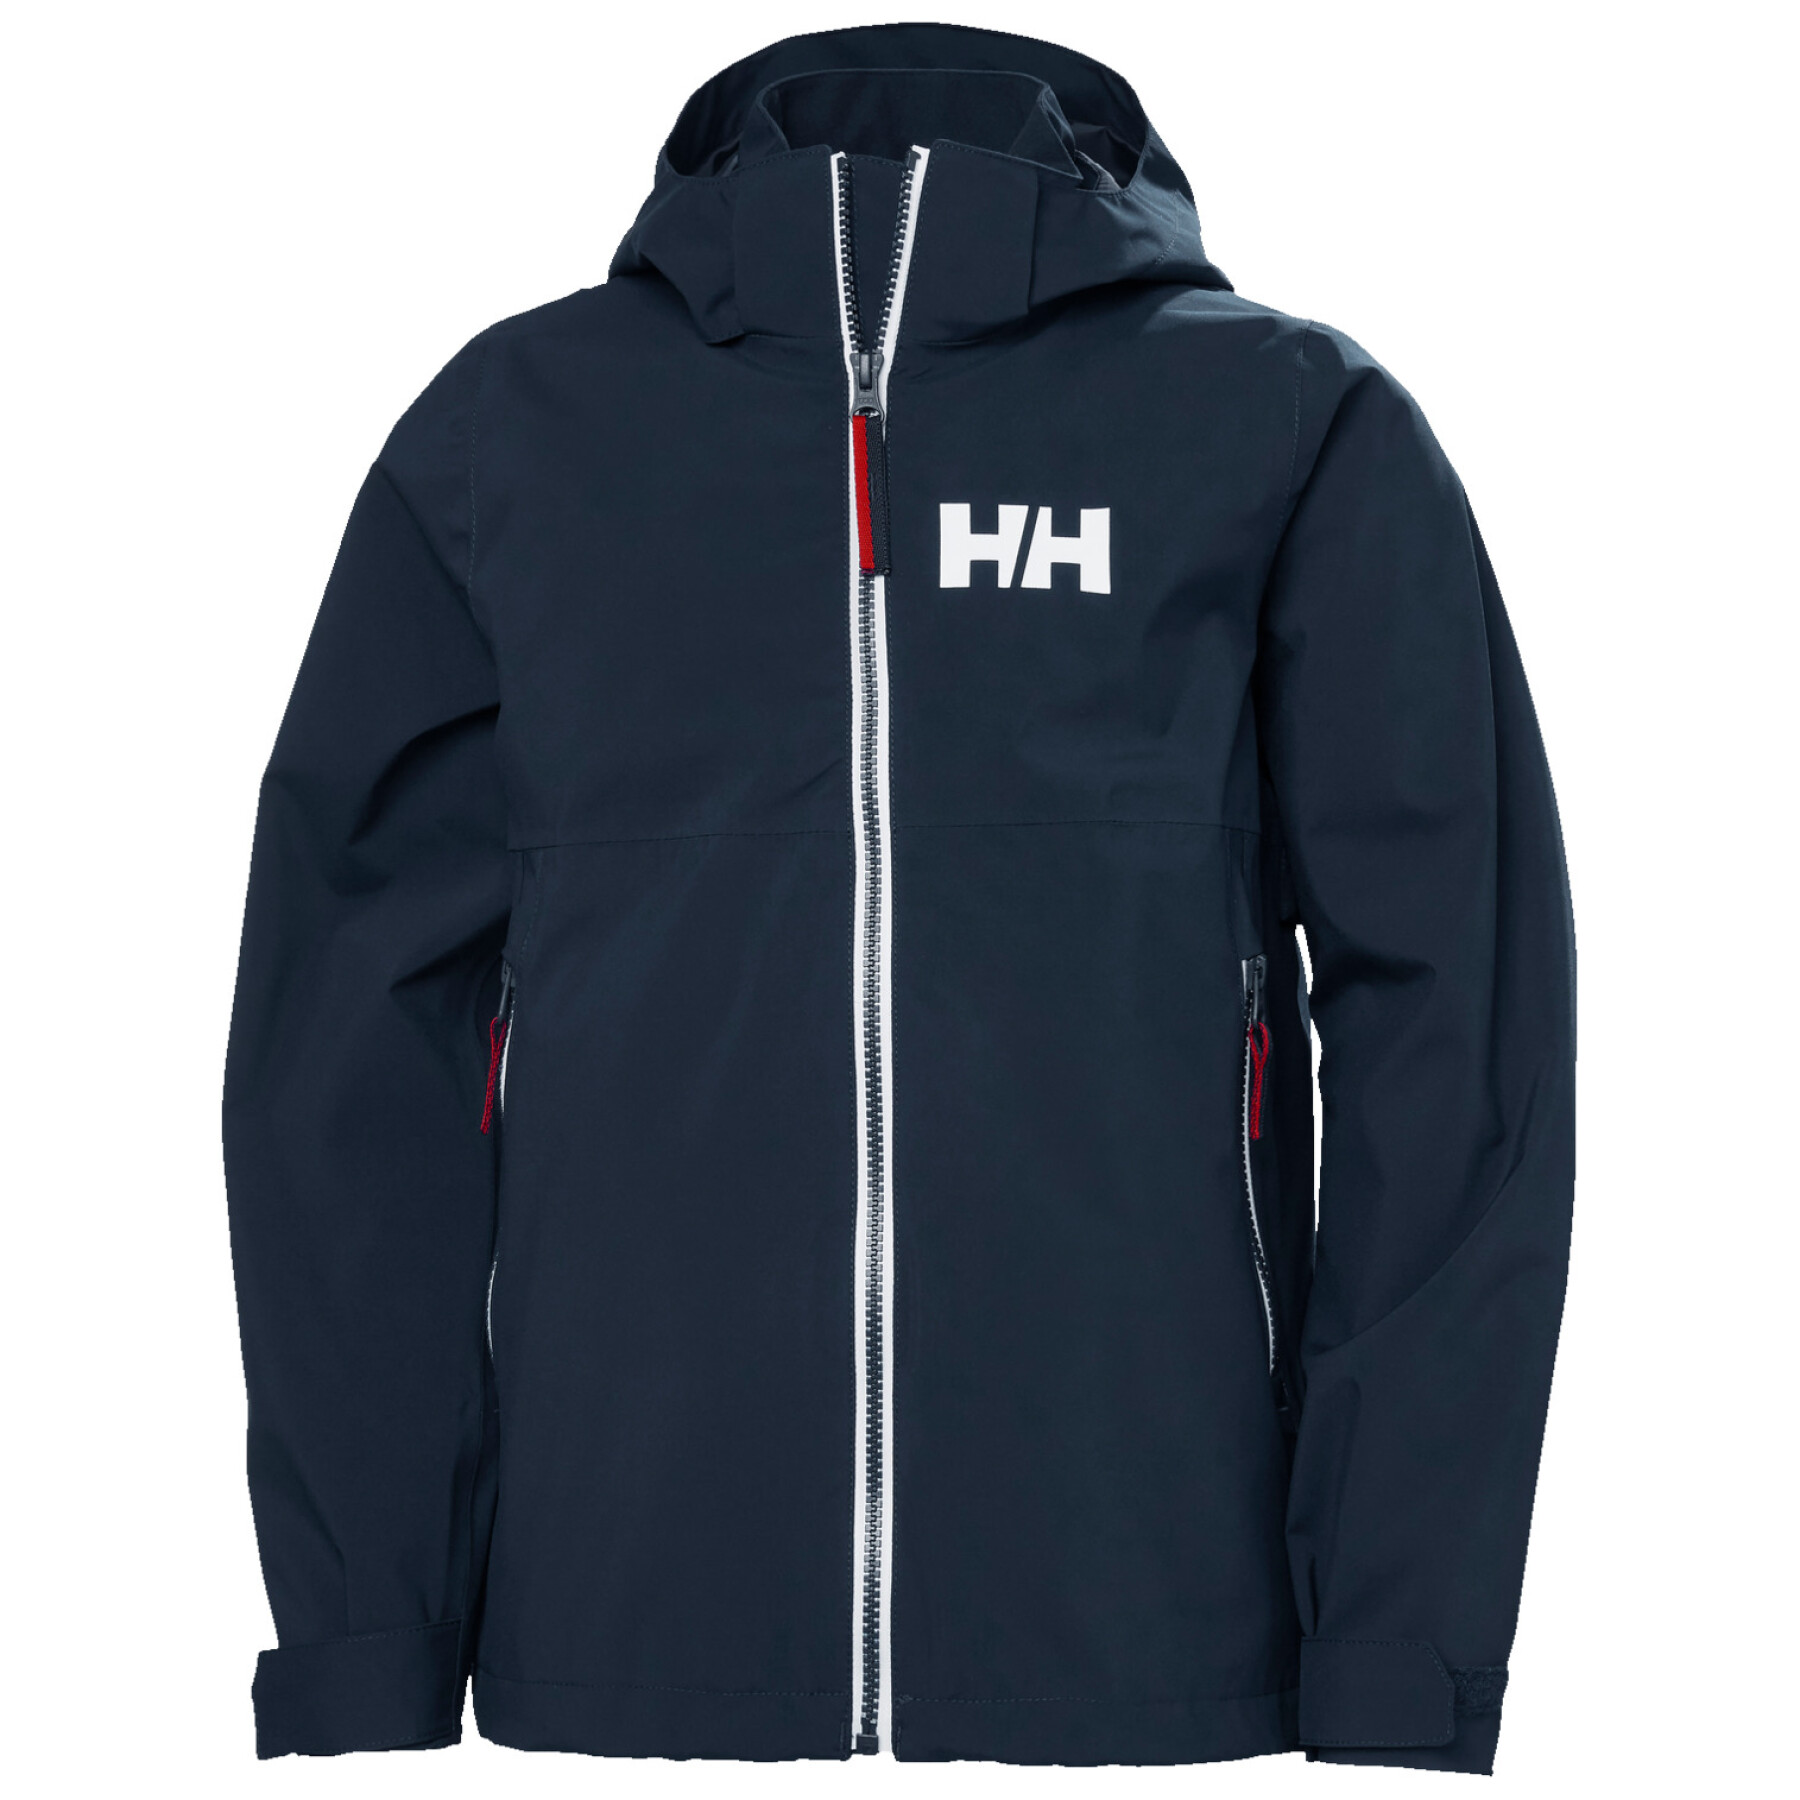 Giacca impermeabile per bambini Helly Hansen Rigging